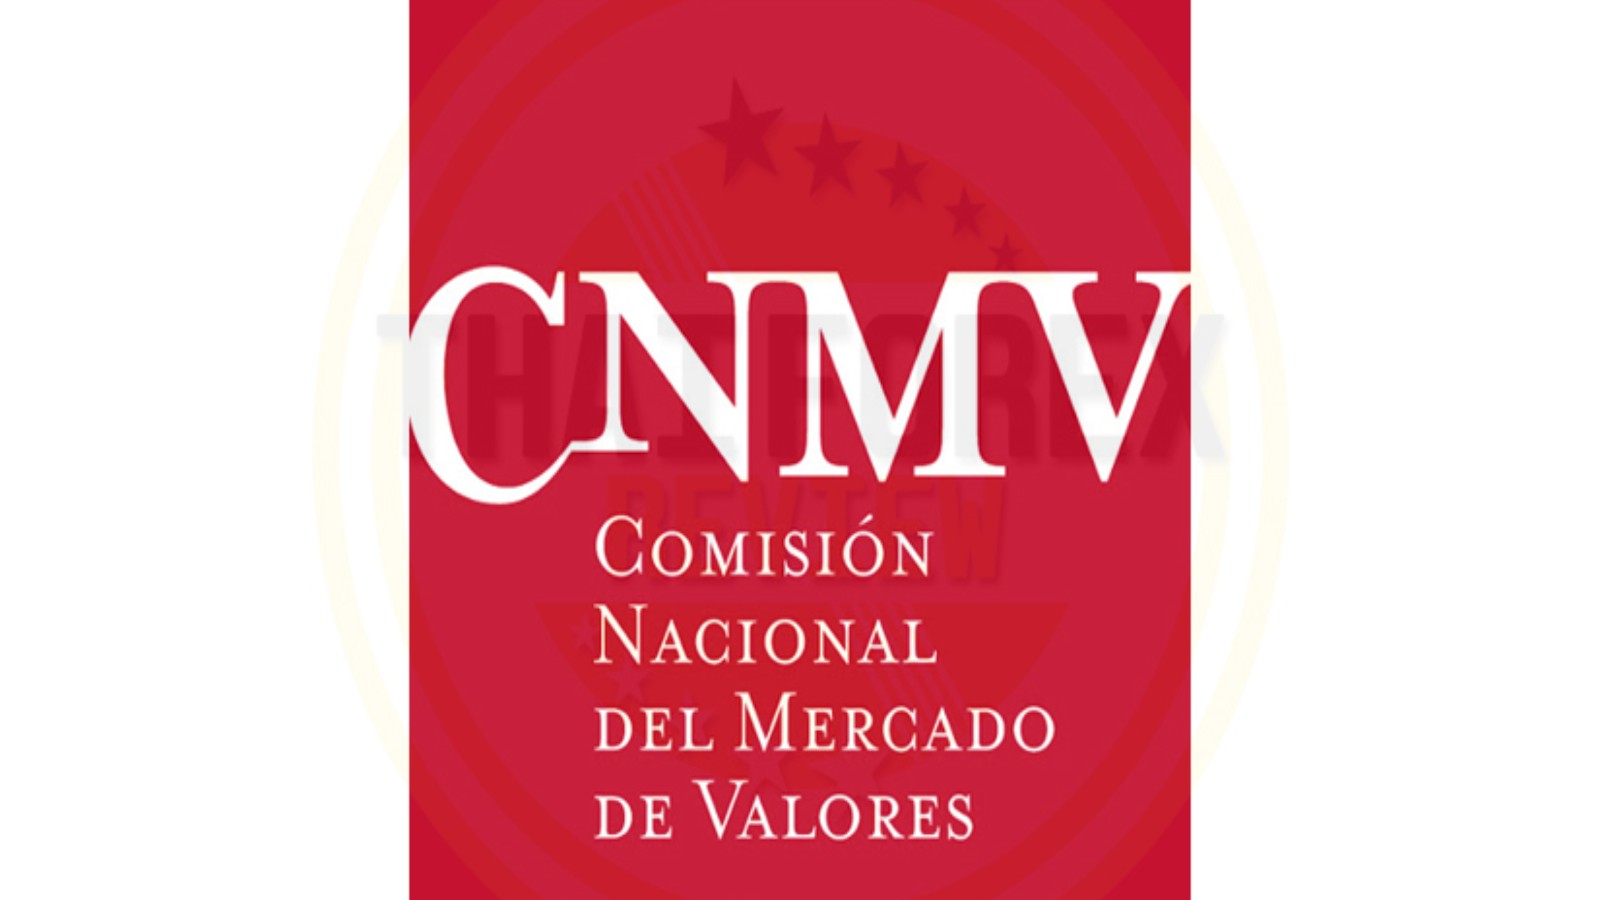 CNMV (The National Securities Market Commission)